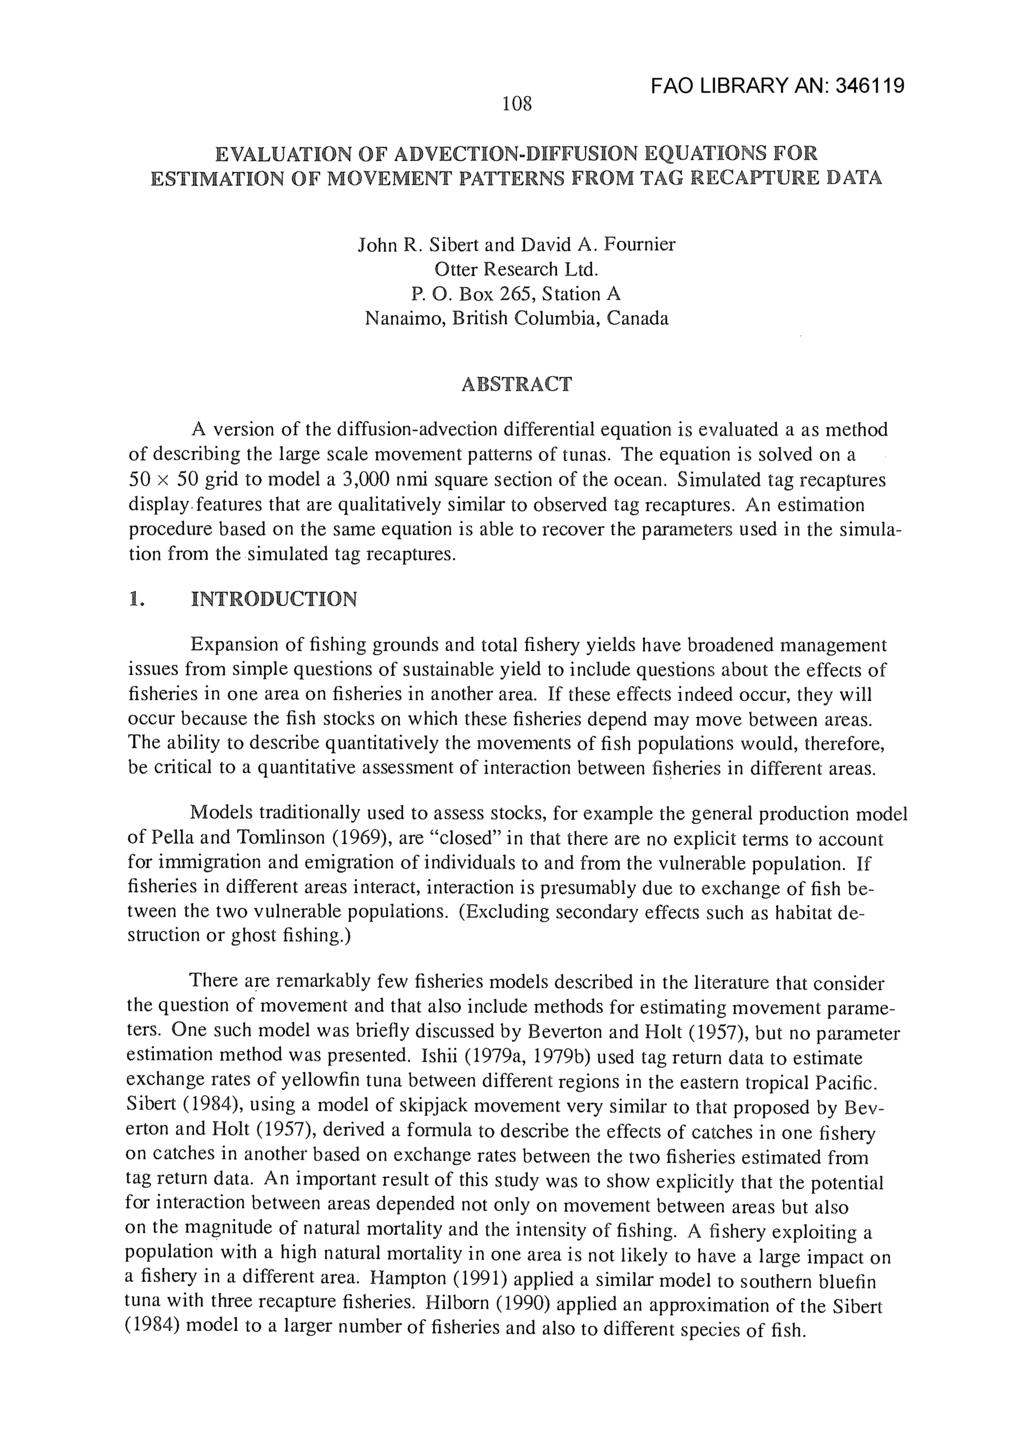 108 FAO LIBRARY AN: 346119 EVALUATION OF ADVECTION-DIFFUSION EQUATIONS F ESTIMATION OF MOVEMENT PATTERNS FROM TAG REC * E IATA John R. Sibert and David A. Fournier Otter Research Ltd. P. 0.